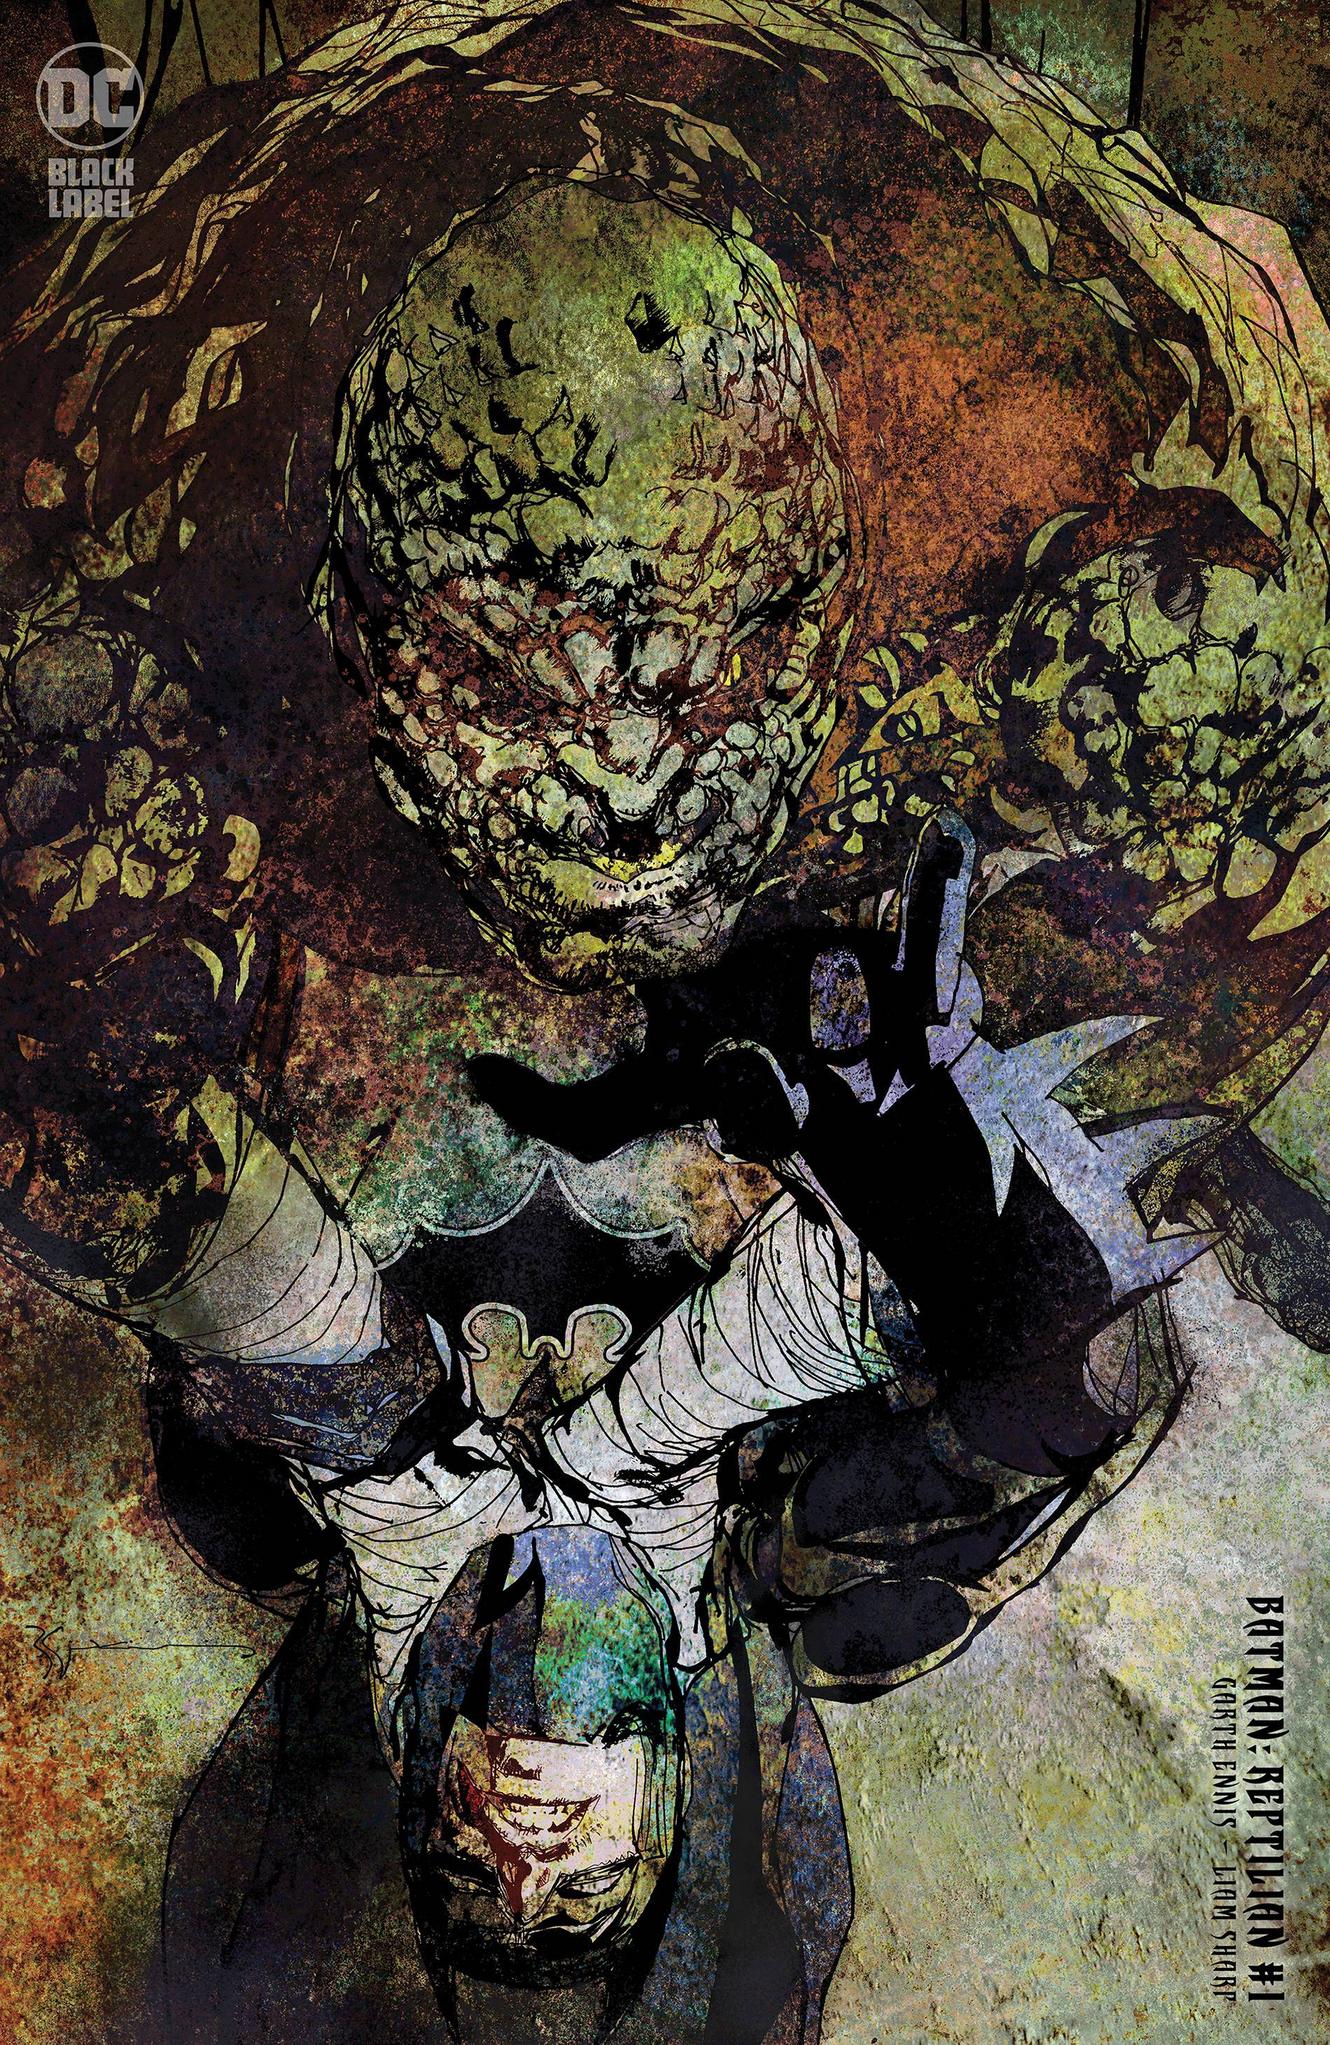 Batman Reptilian # 1 1:25 Variant - Signed By Ennis, Sharp And Sienkiewicz